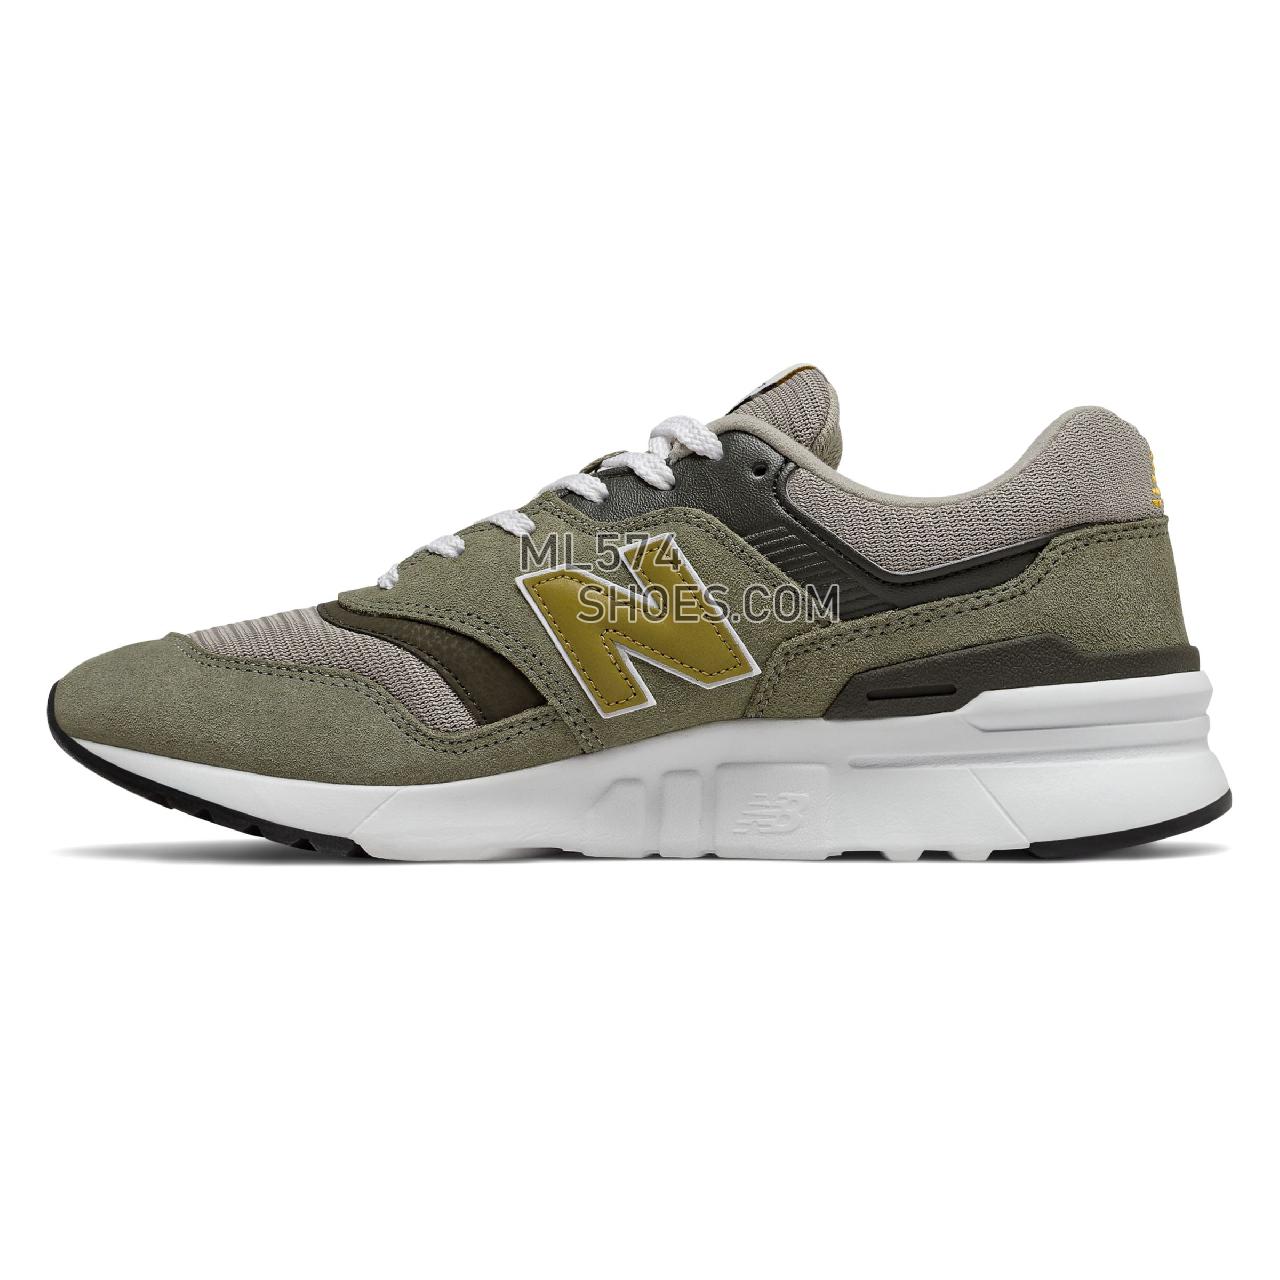 New Balance 997H - Men's 997H Classic - Covert Green with Varsity Gold - CM997HEZ